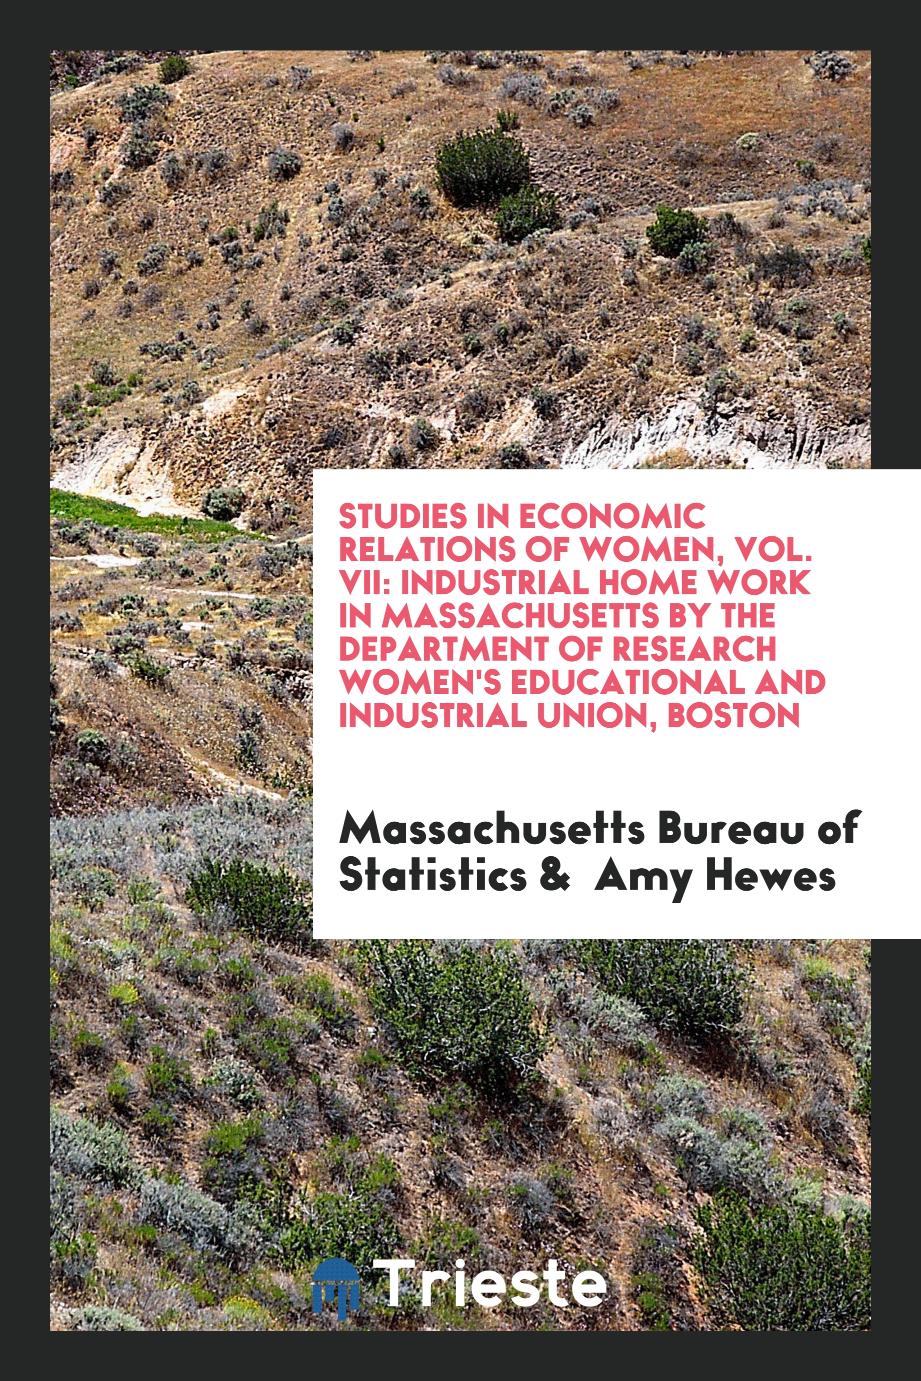 Studies in Economic Relations of Women, Vol. VII: Industrial Home Work in Massachusetts by the Department of Research Women's Educational and Industrial Union, Boston